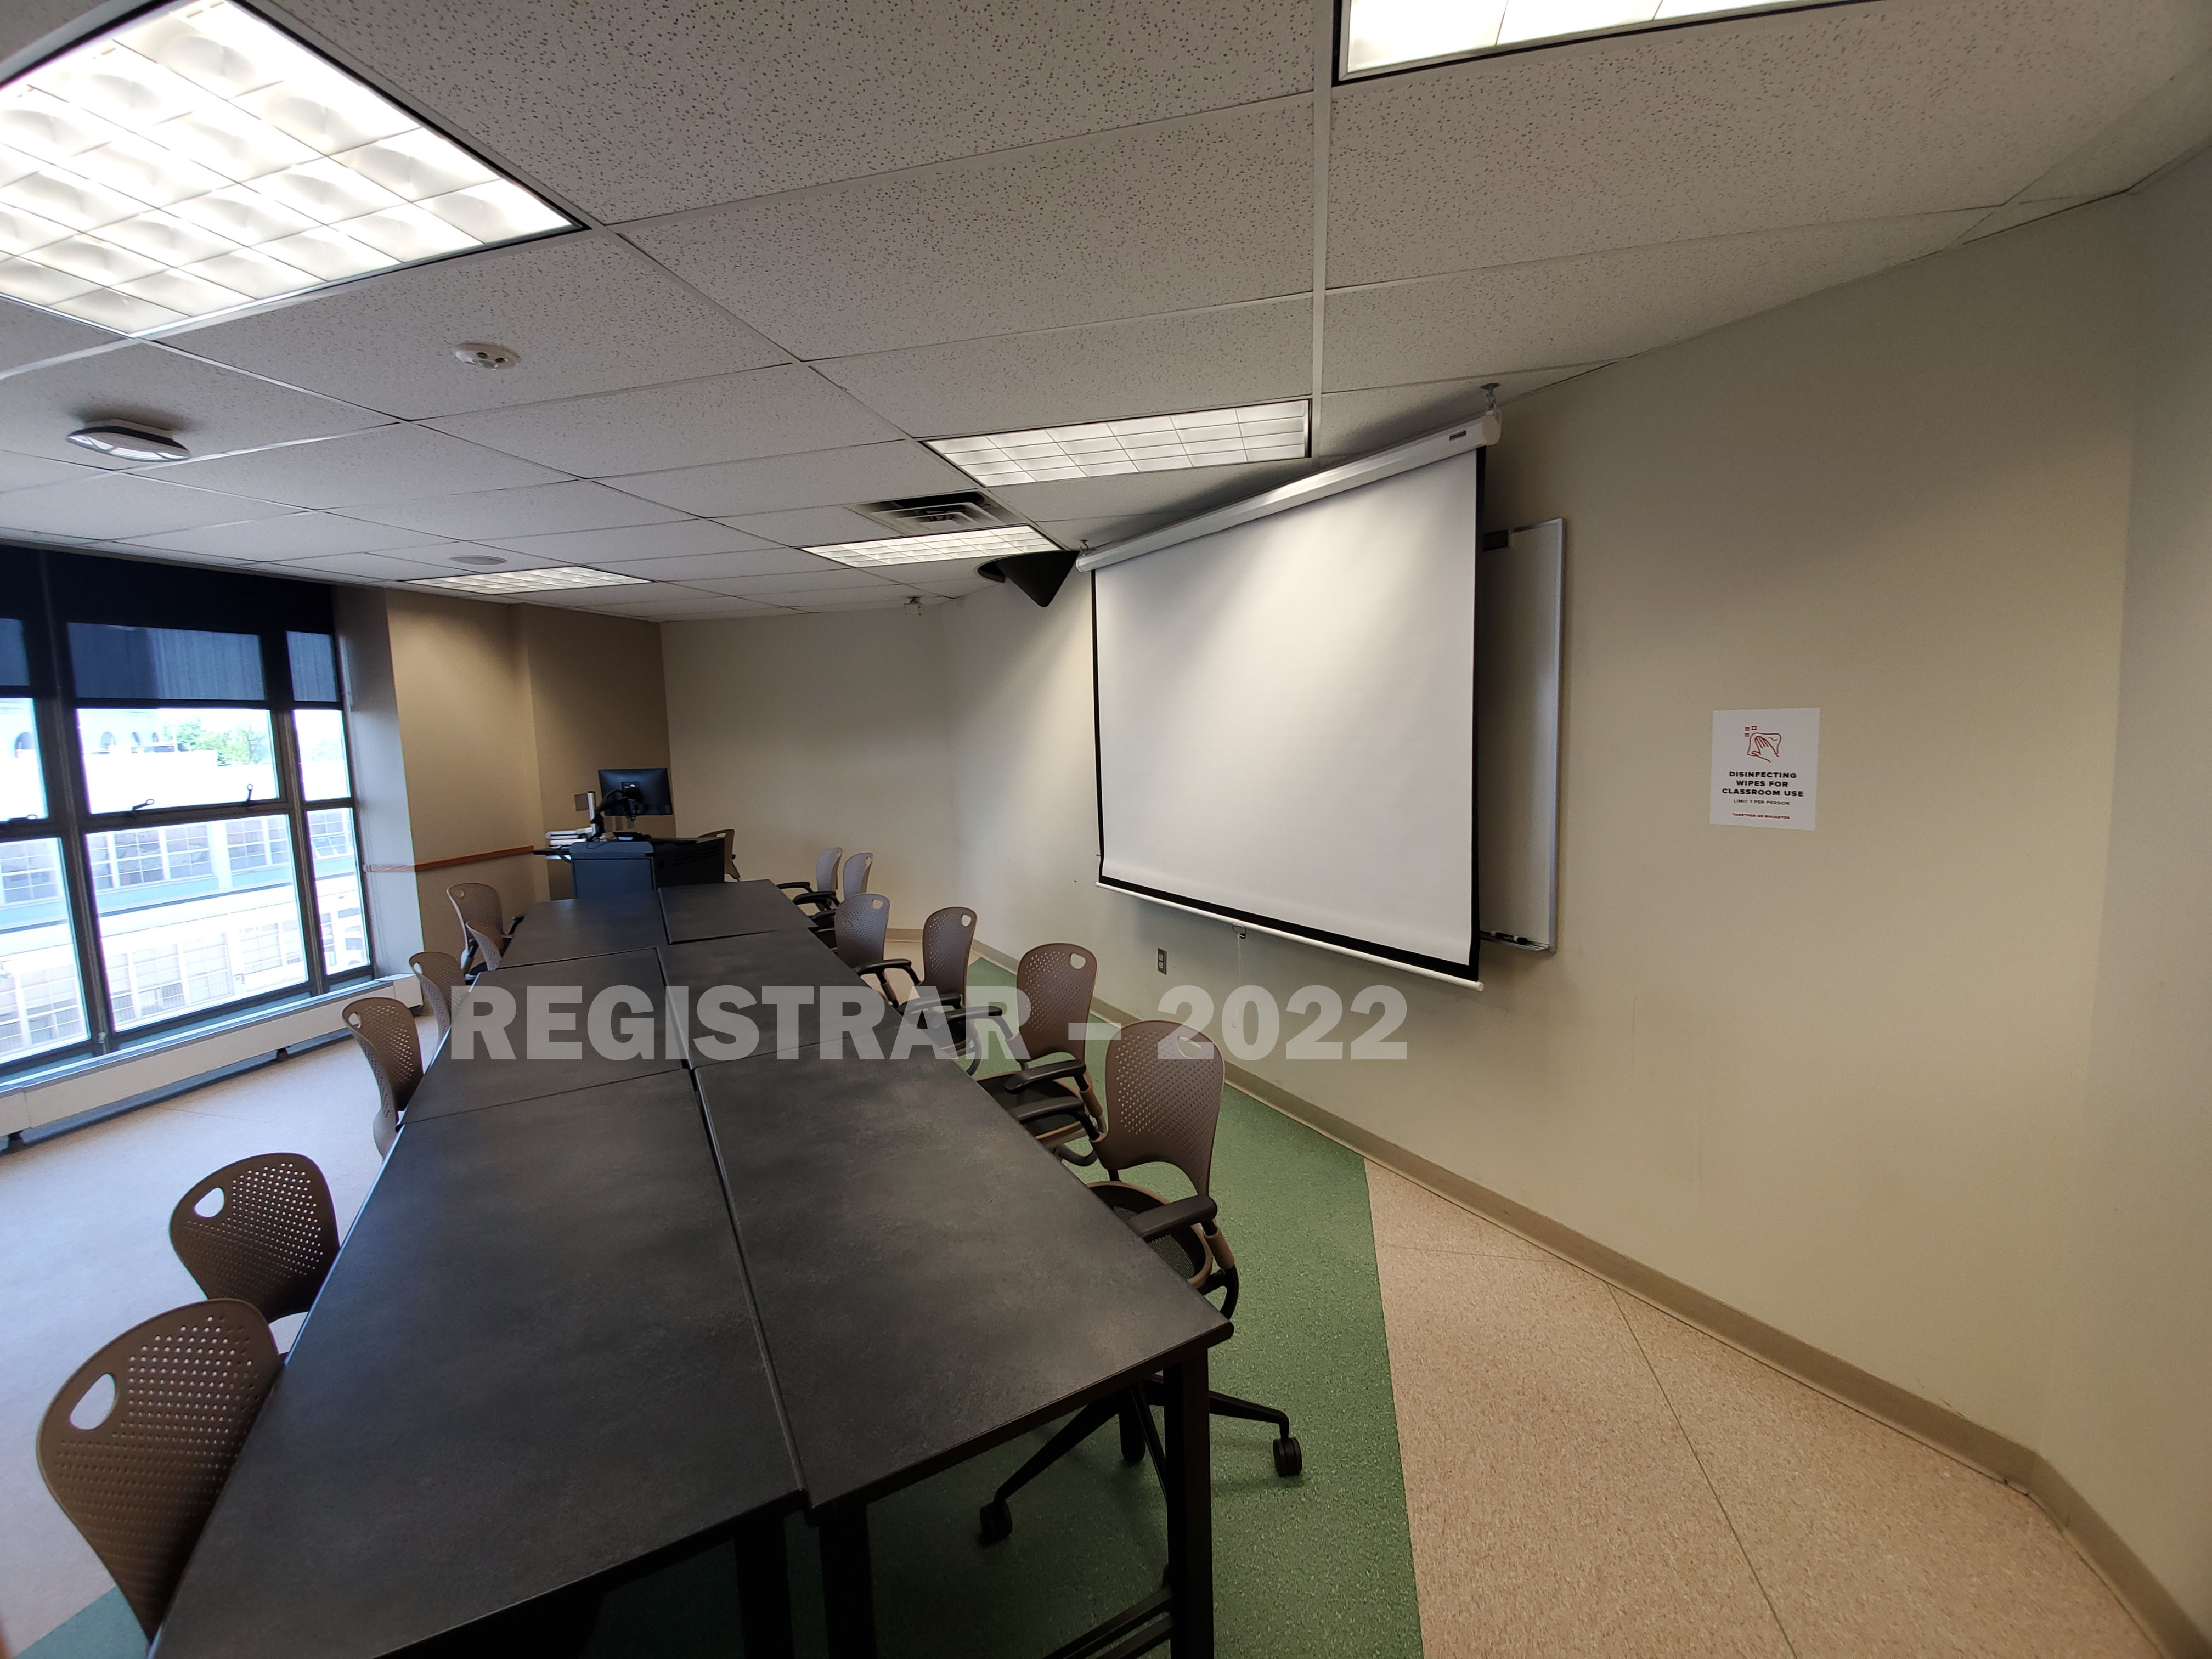 Enarson Classroom Building room 338 ultra wide angle view from the back of the room with projector screen down